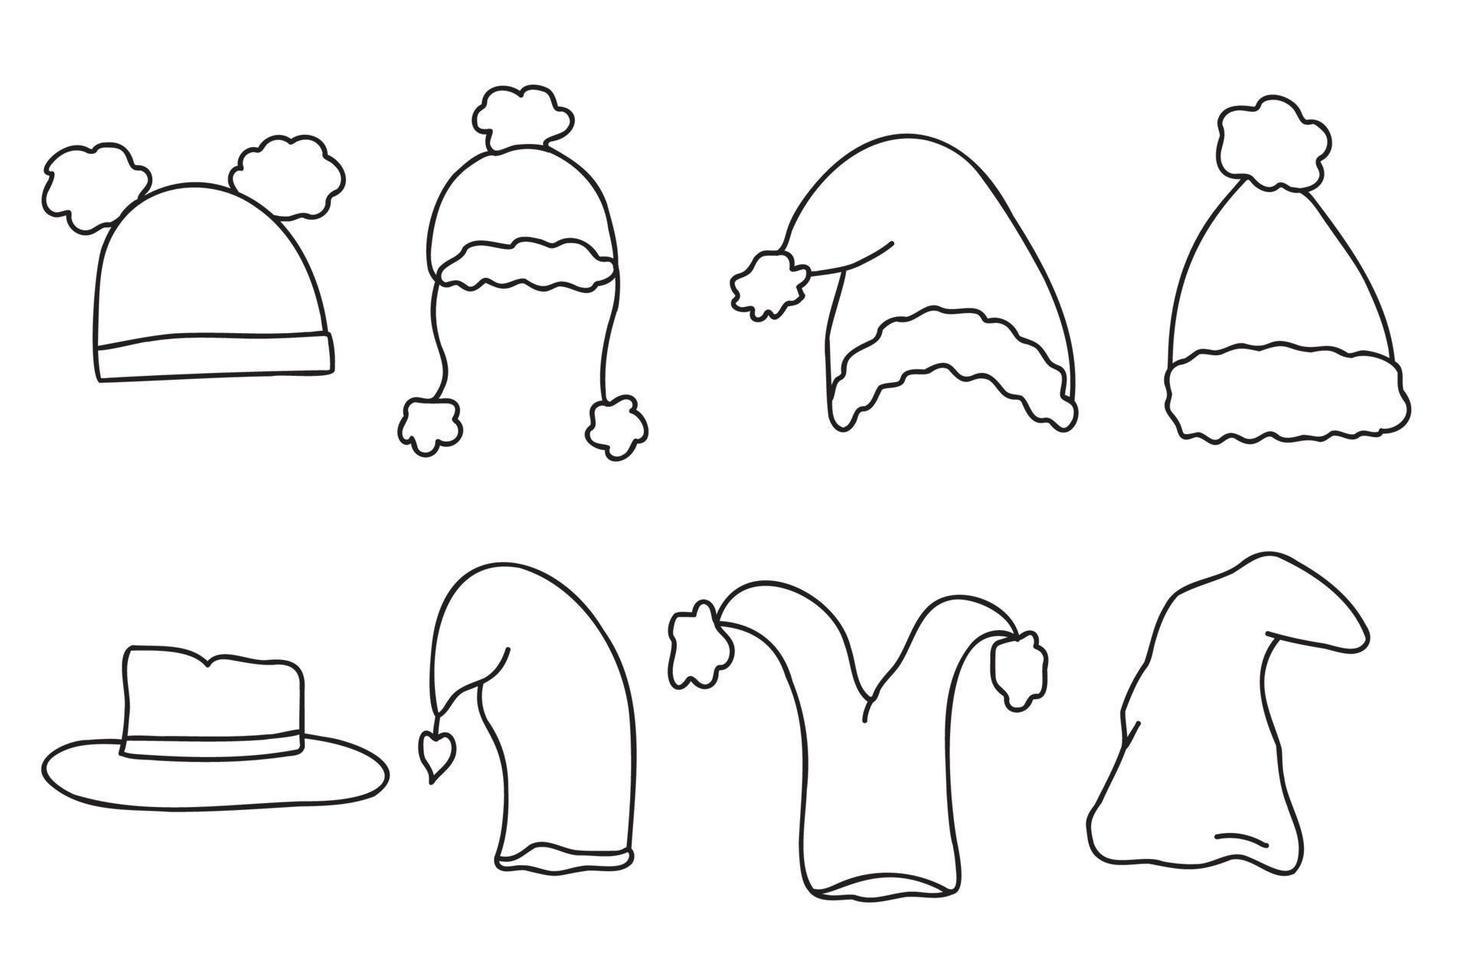 The picture shows different types of hats, it is intended for postcards, elves, Santa Claus, printing and you can use it in different cases. vector